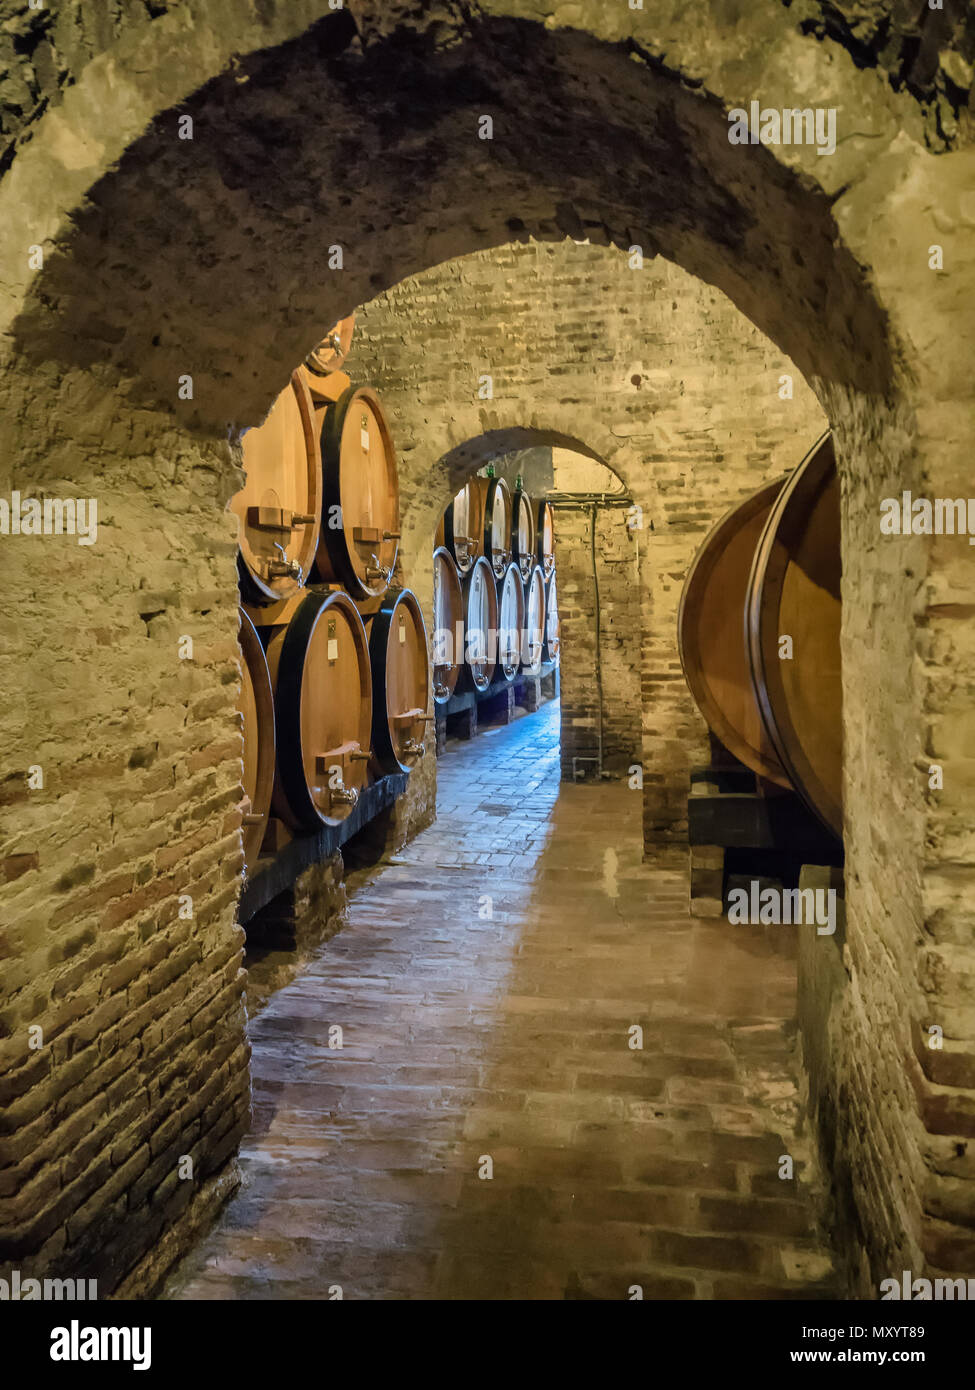 Barrels for winemaking in Tuscany, Italy Stock Photo